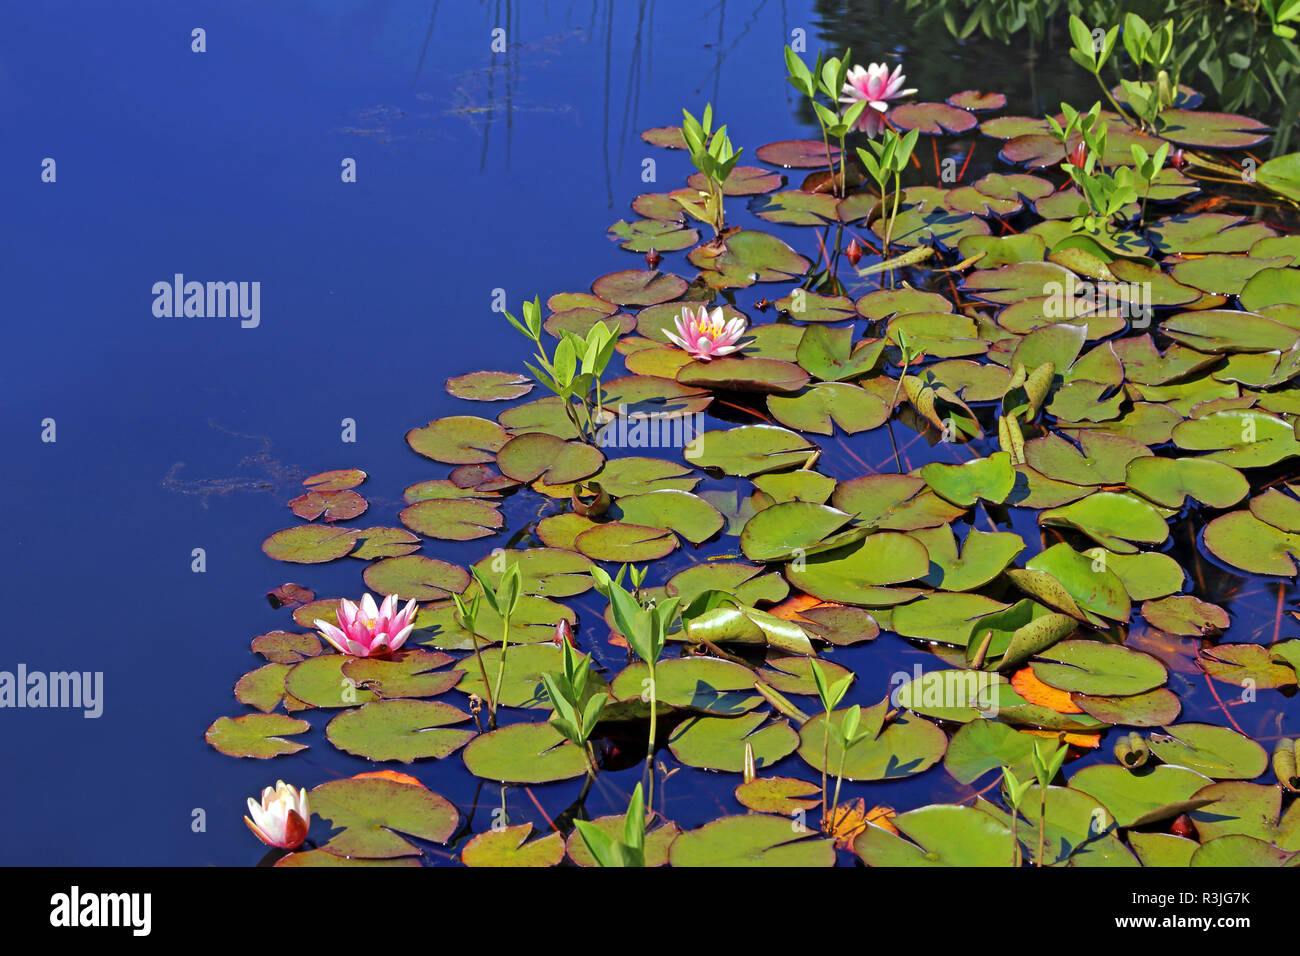 swimming leaf zone of a pond Stock Photo